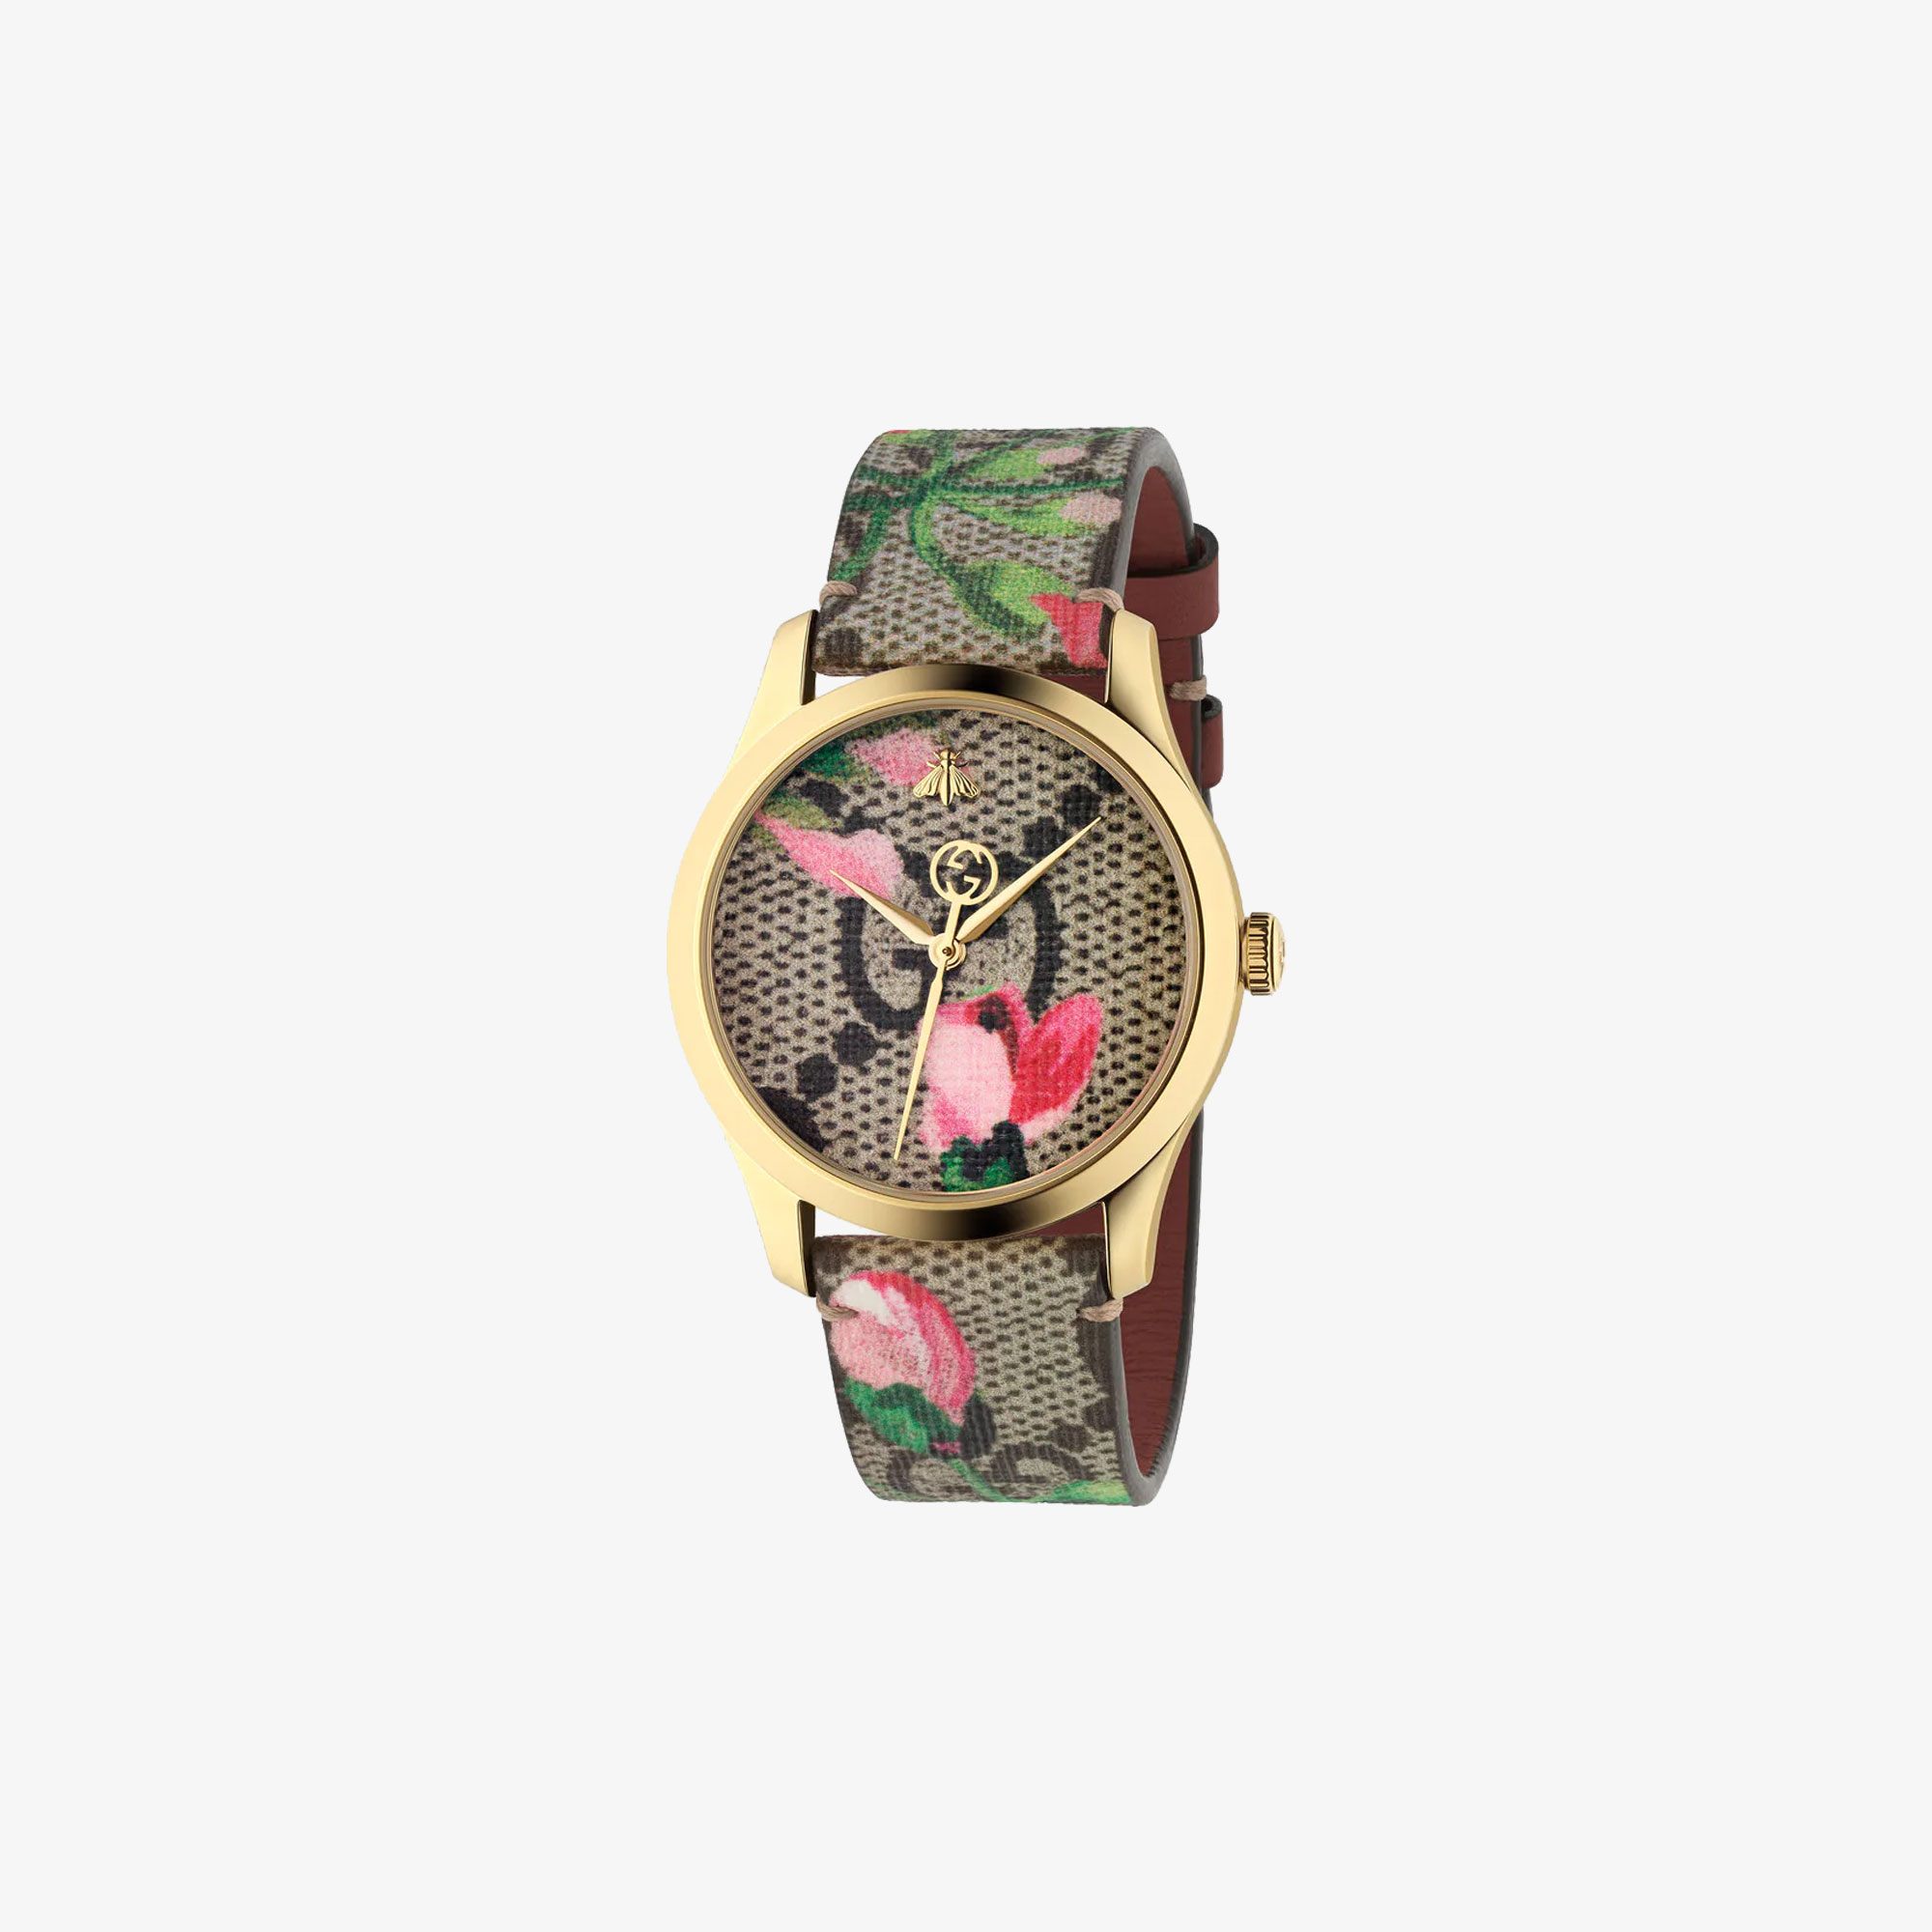 GUCCI LADIES G-TIMELESS GOLD PLATED FLOWER MOTIF LEATHER STRAP WATCH